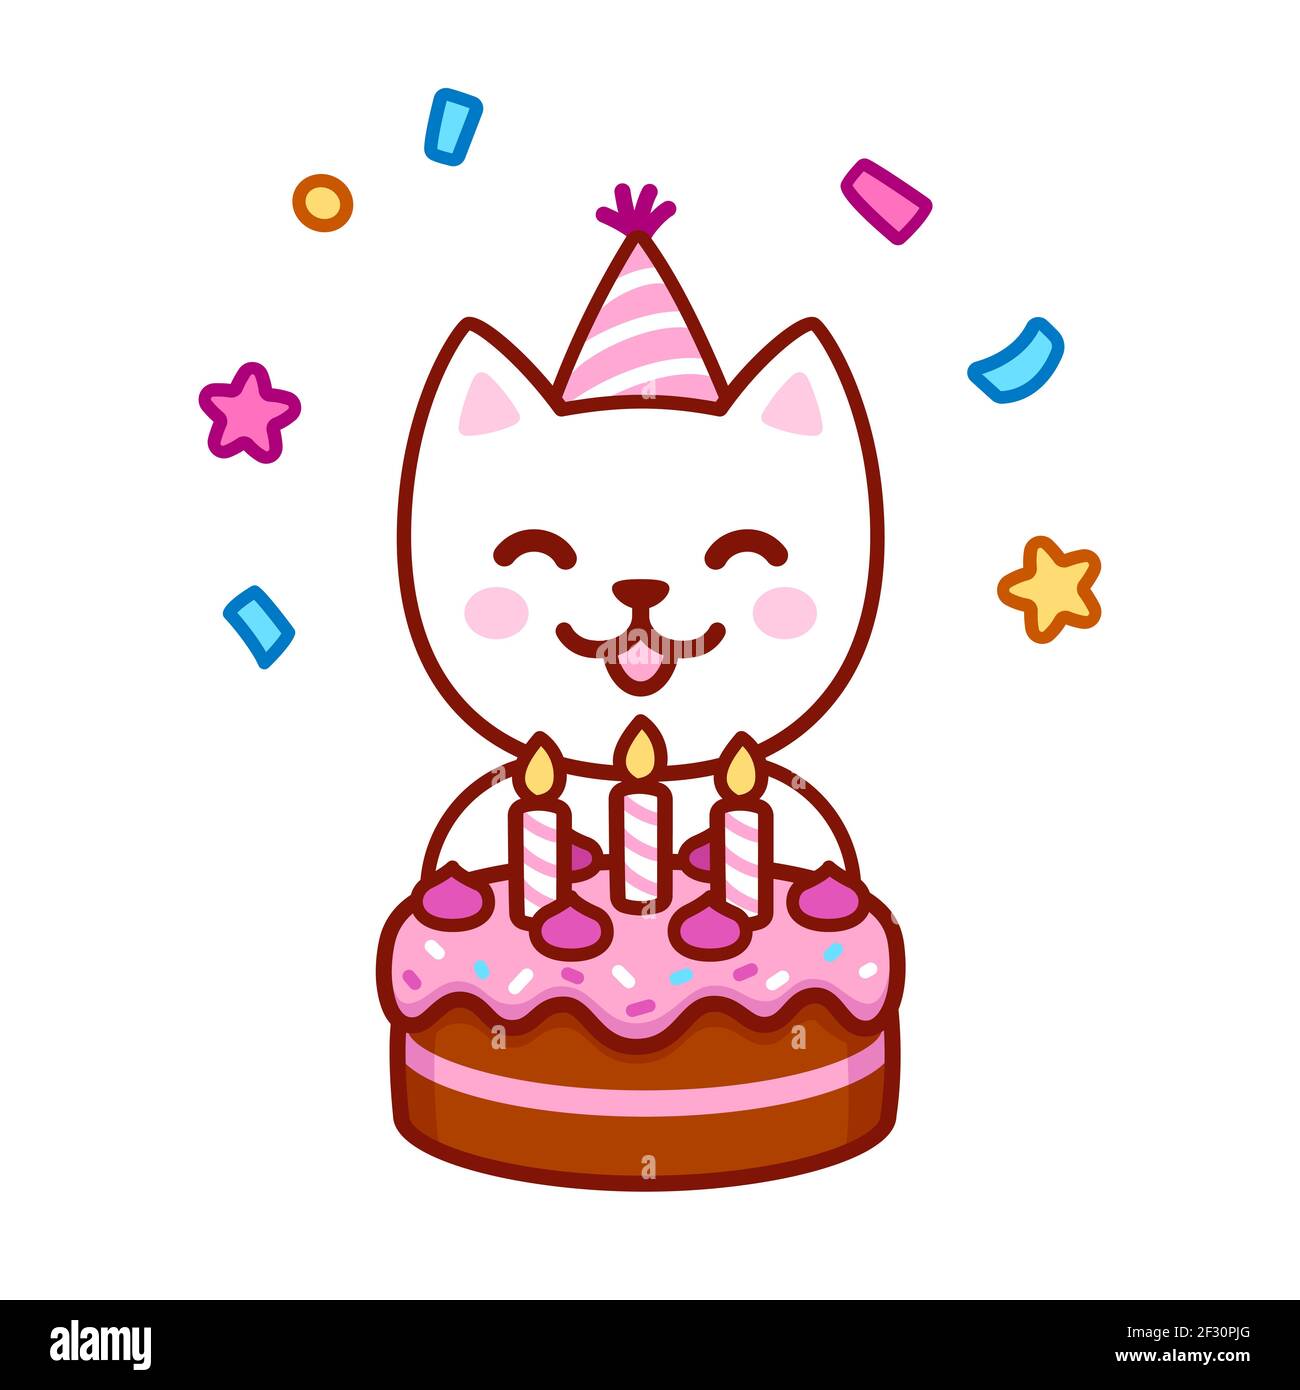 Happy birthday Cut Out Stock Images & Pictures - Alamy